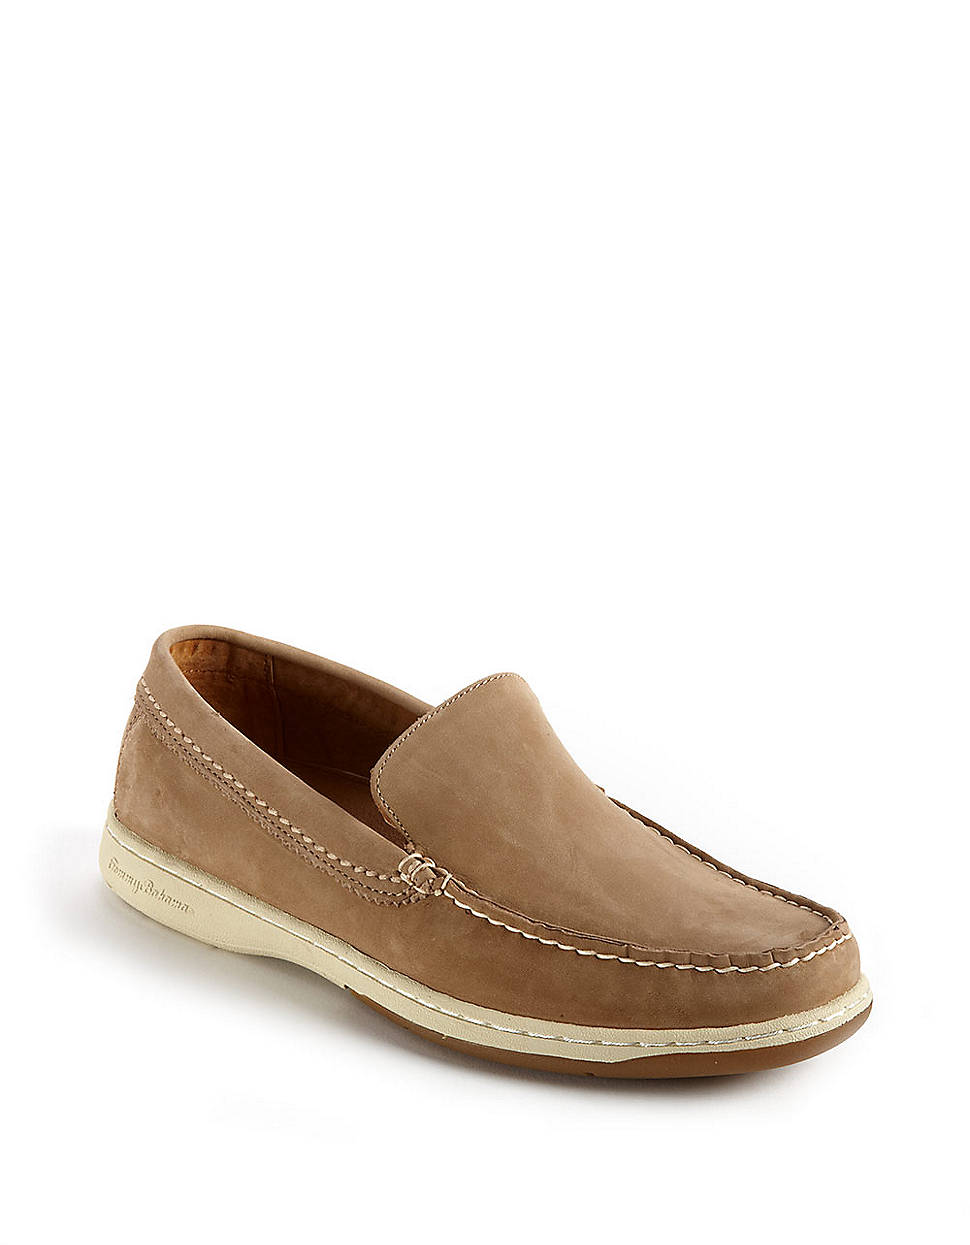 Tommy Bahama Alexander Suede Venetian Slip-on Boat Shoes in Brown for ...